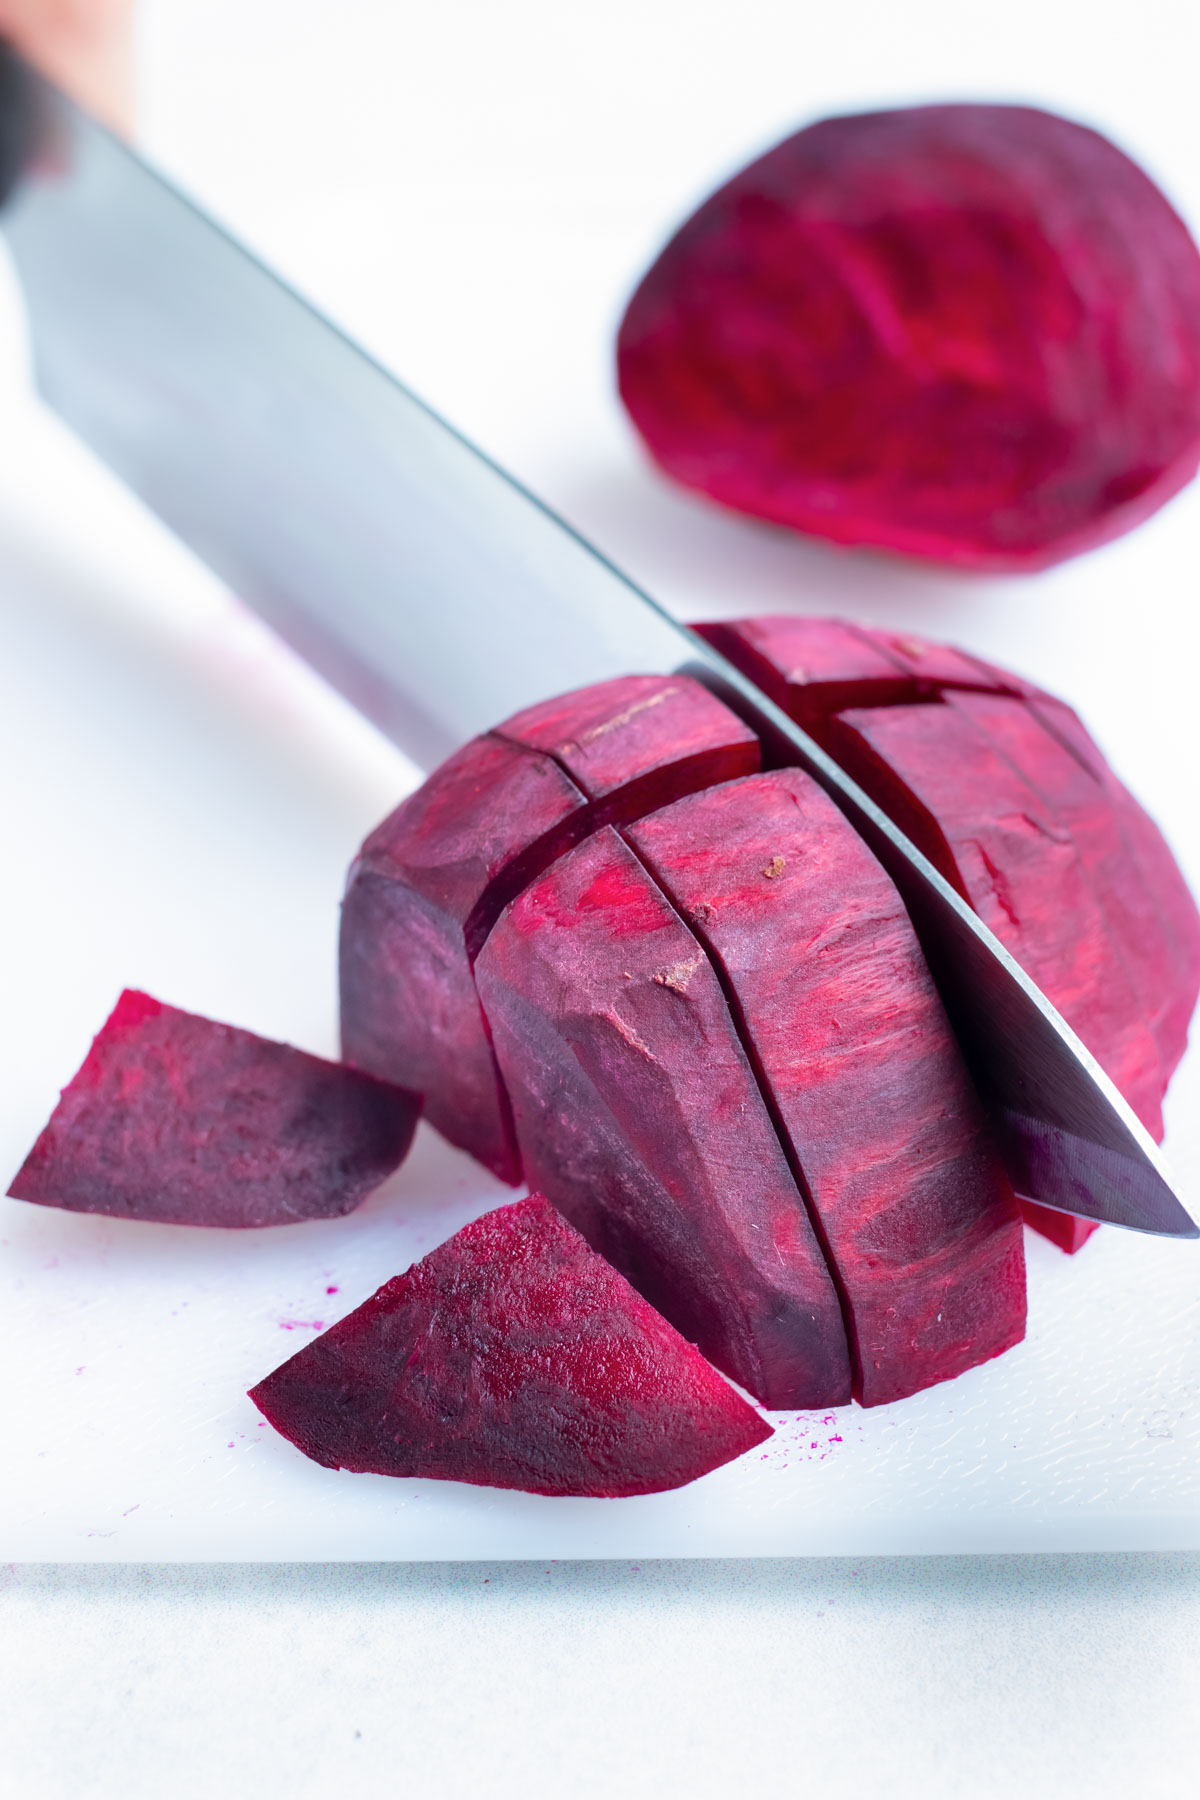 The whole beets are chopped before roasting in the oven.